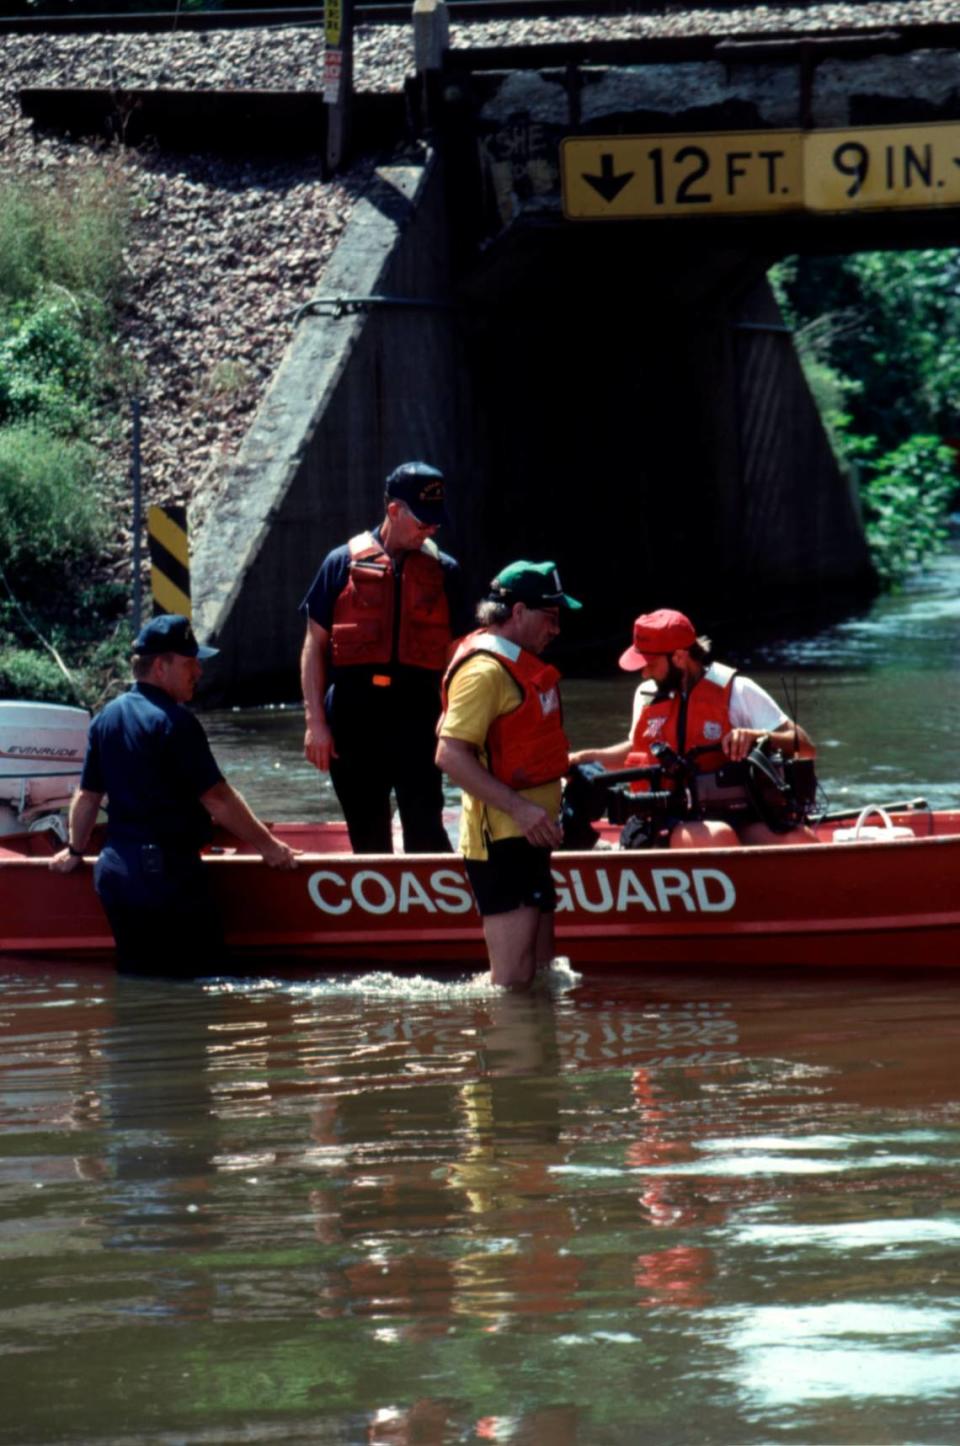 Flood victims are being taken to safe ground after their homes flooded out during the great 1993 Midwest Flood on July 7, 1993. U.S. Coast Guard